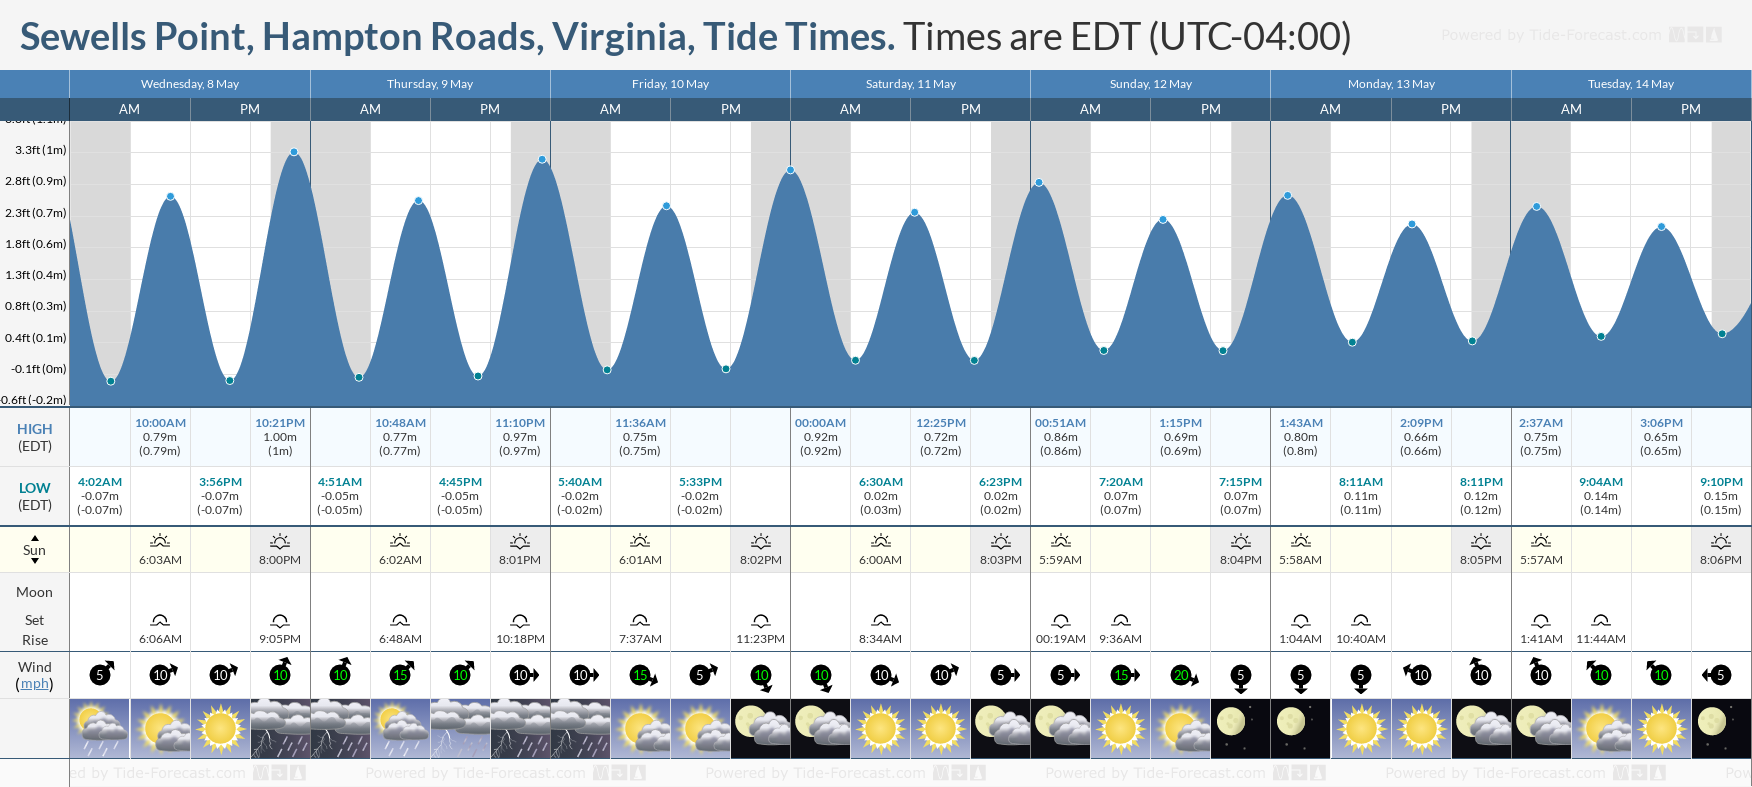 Sewells Point, Hampton Roads, Virginia Tide Chart including high and low tide tide times for the next 7 days